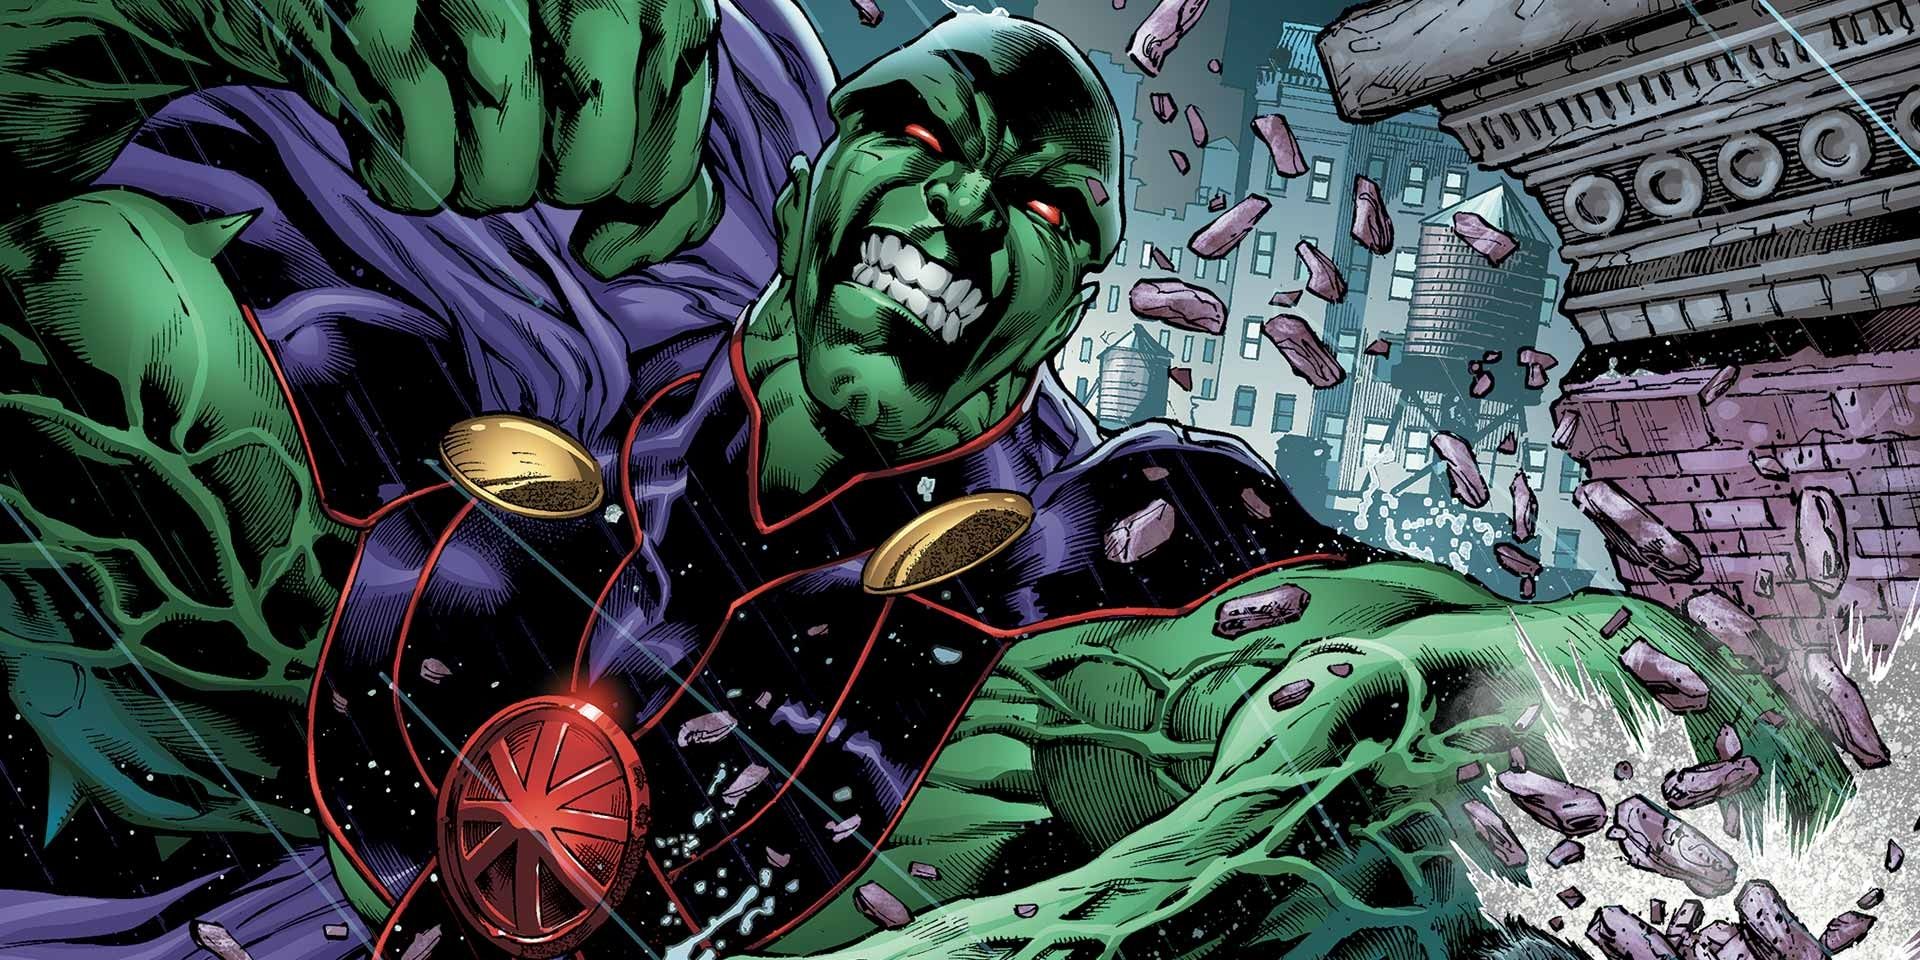 Martian Manhunter throwing punches